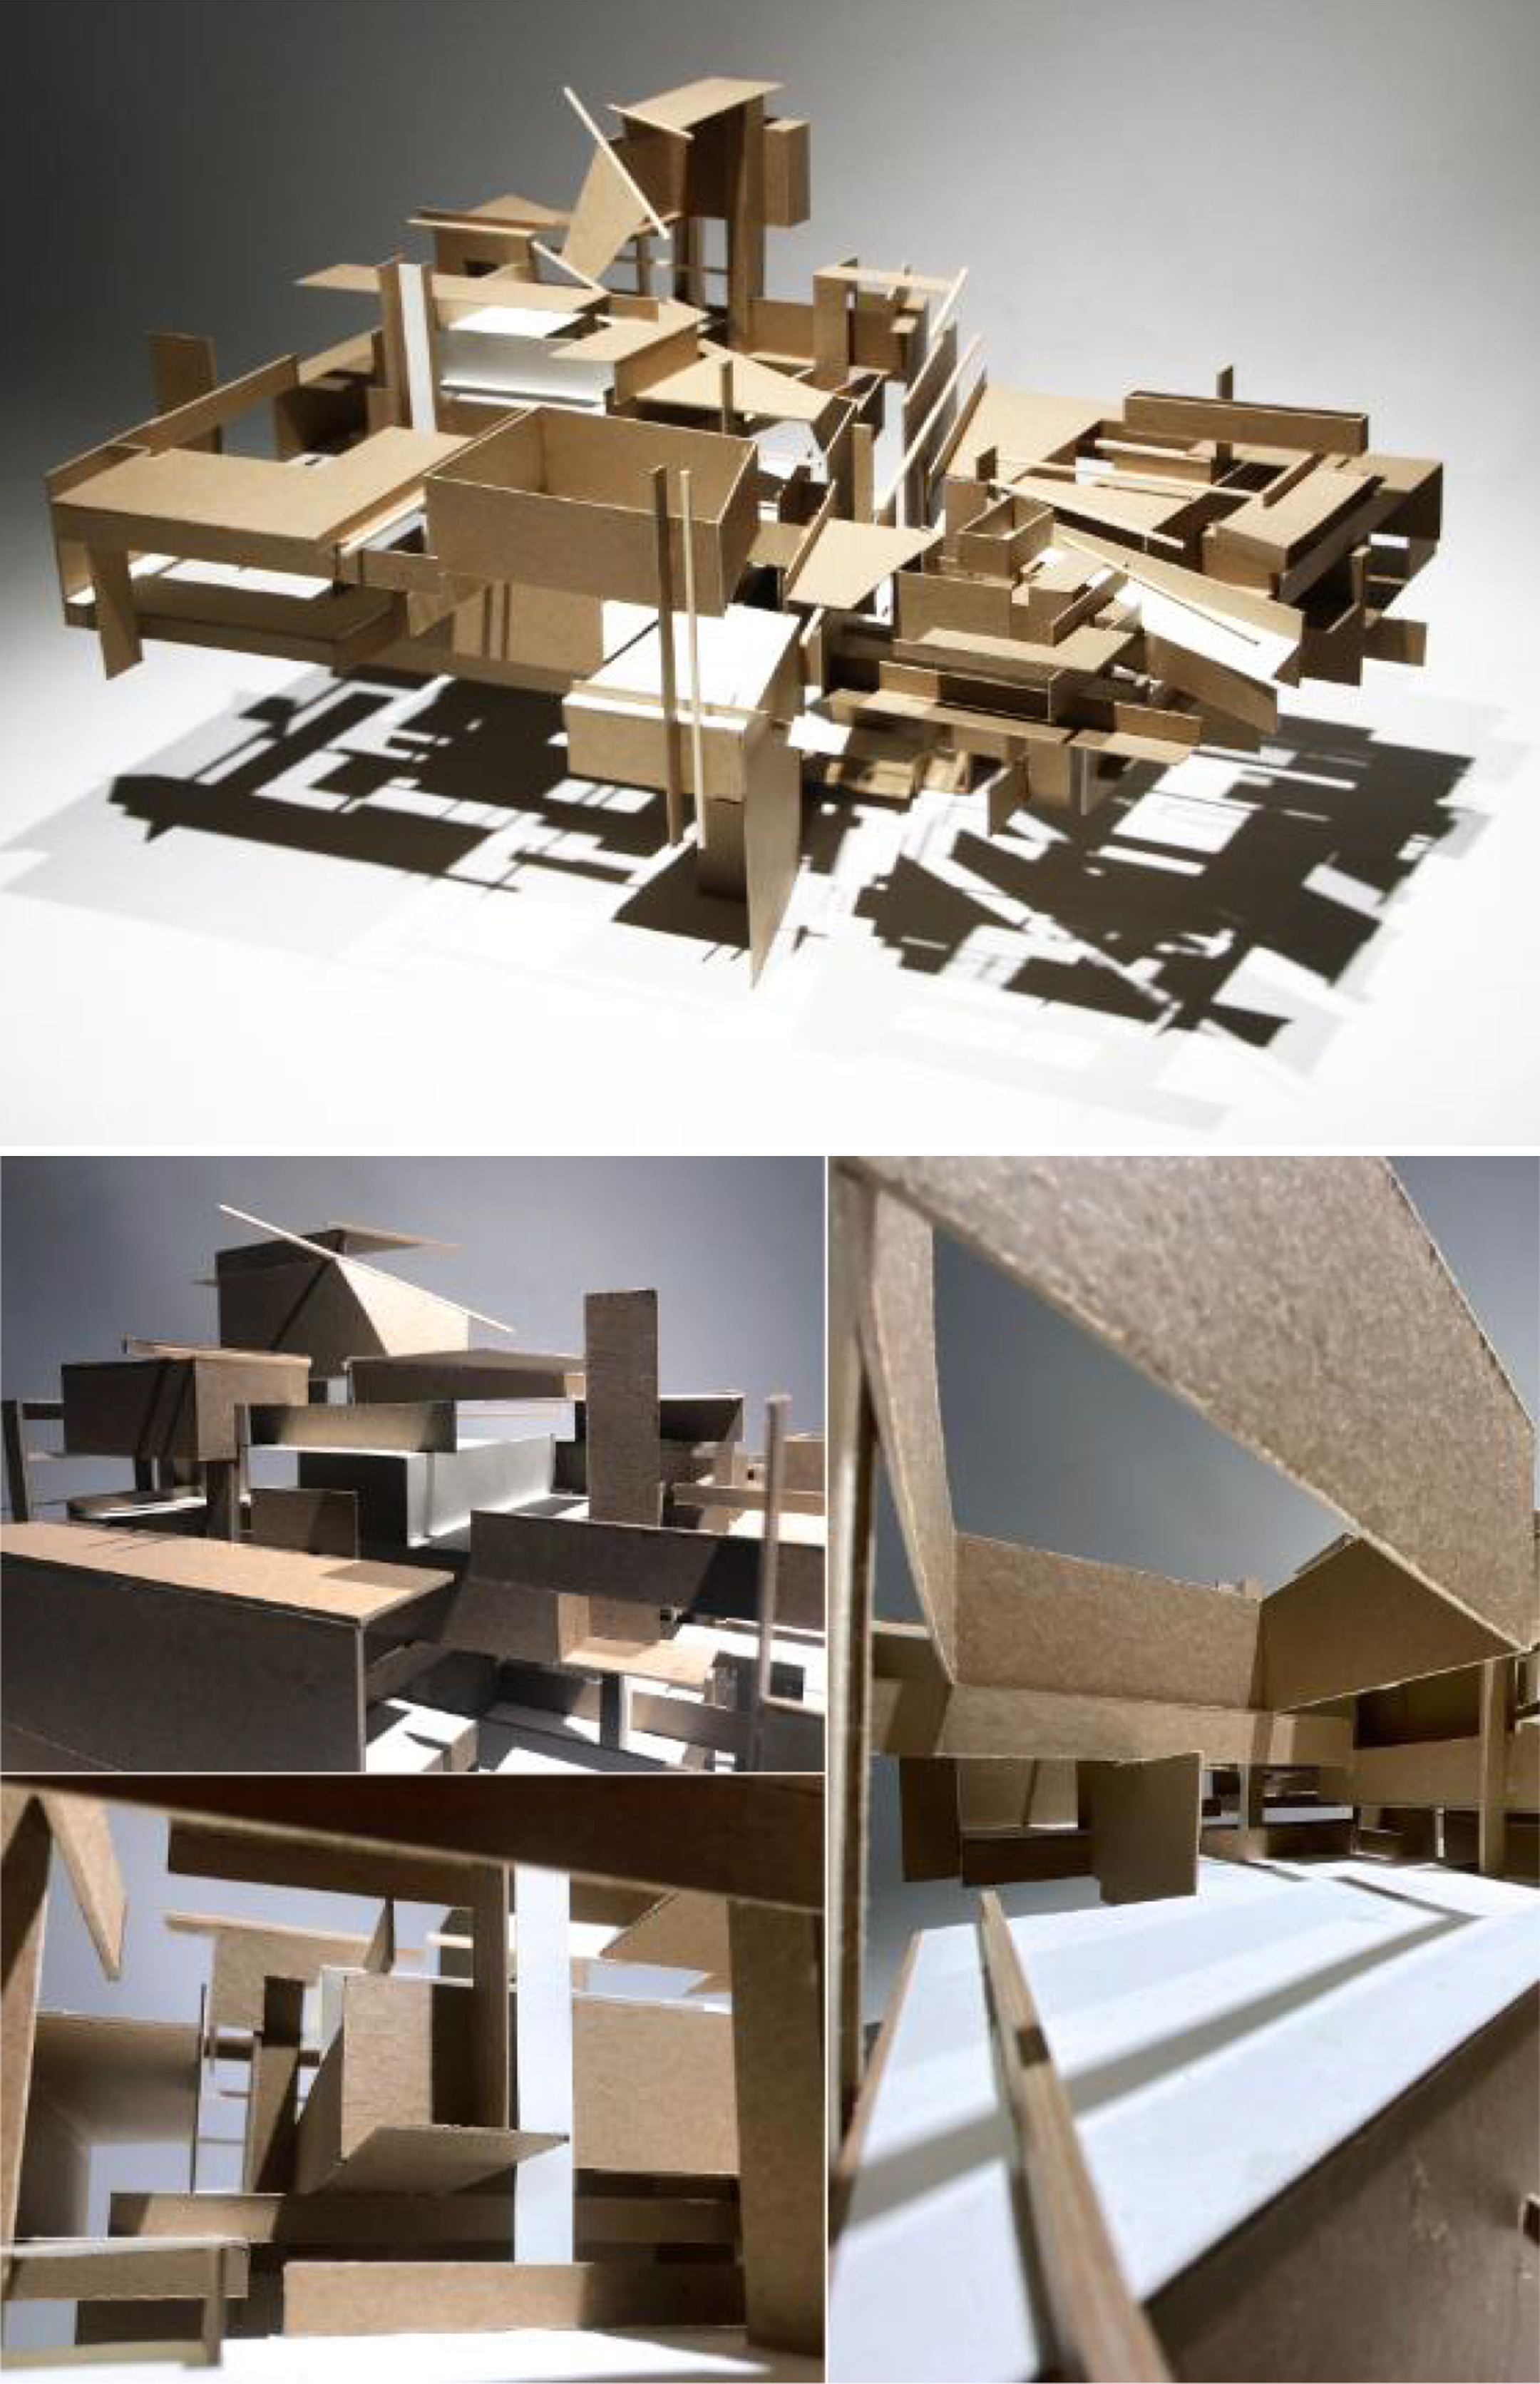 Photo of an abstract cardboard structure, resembling a box exploding in all directions, with process photos below it